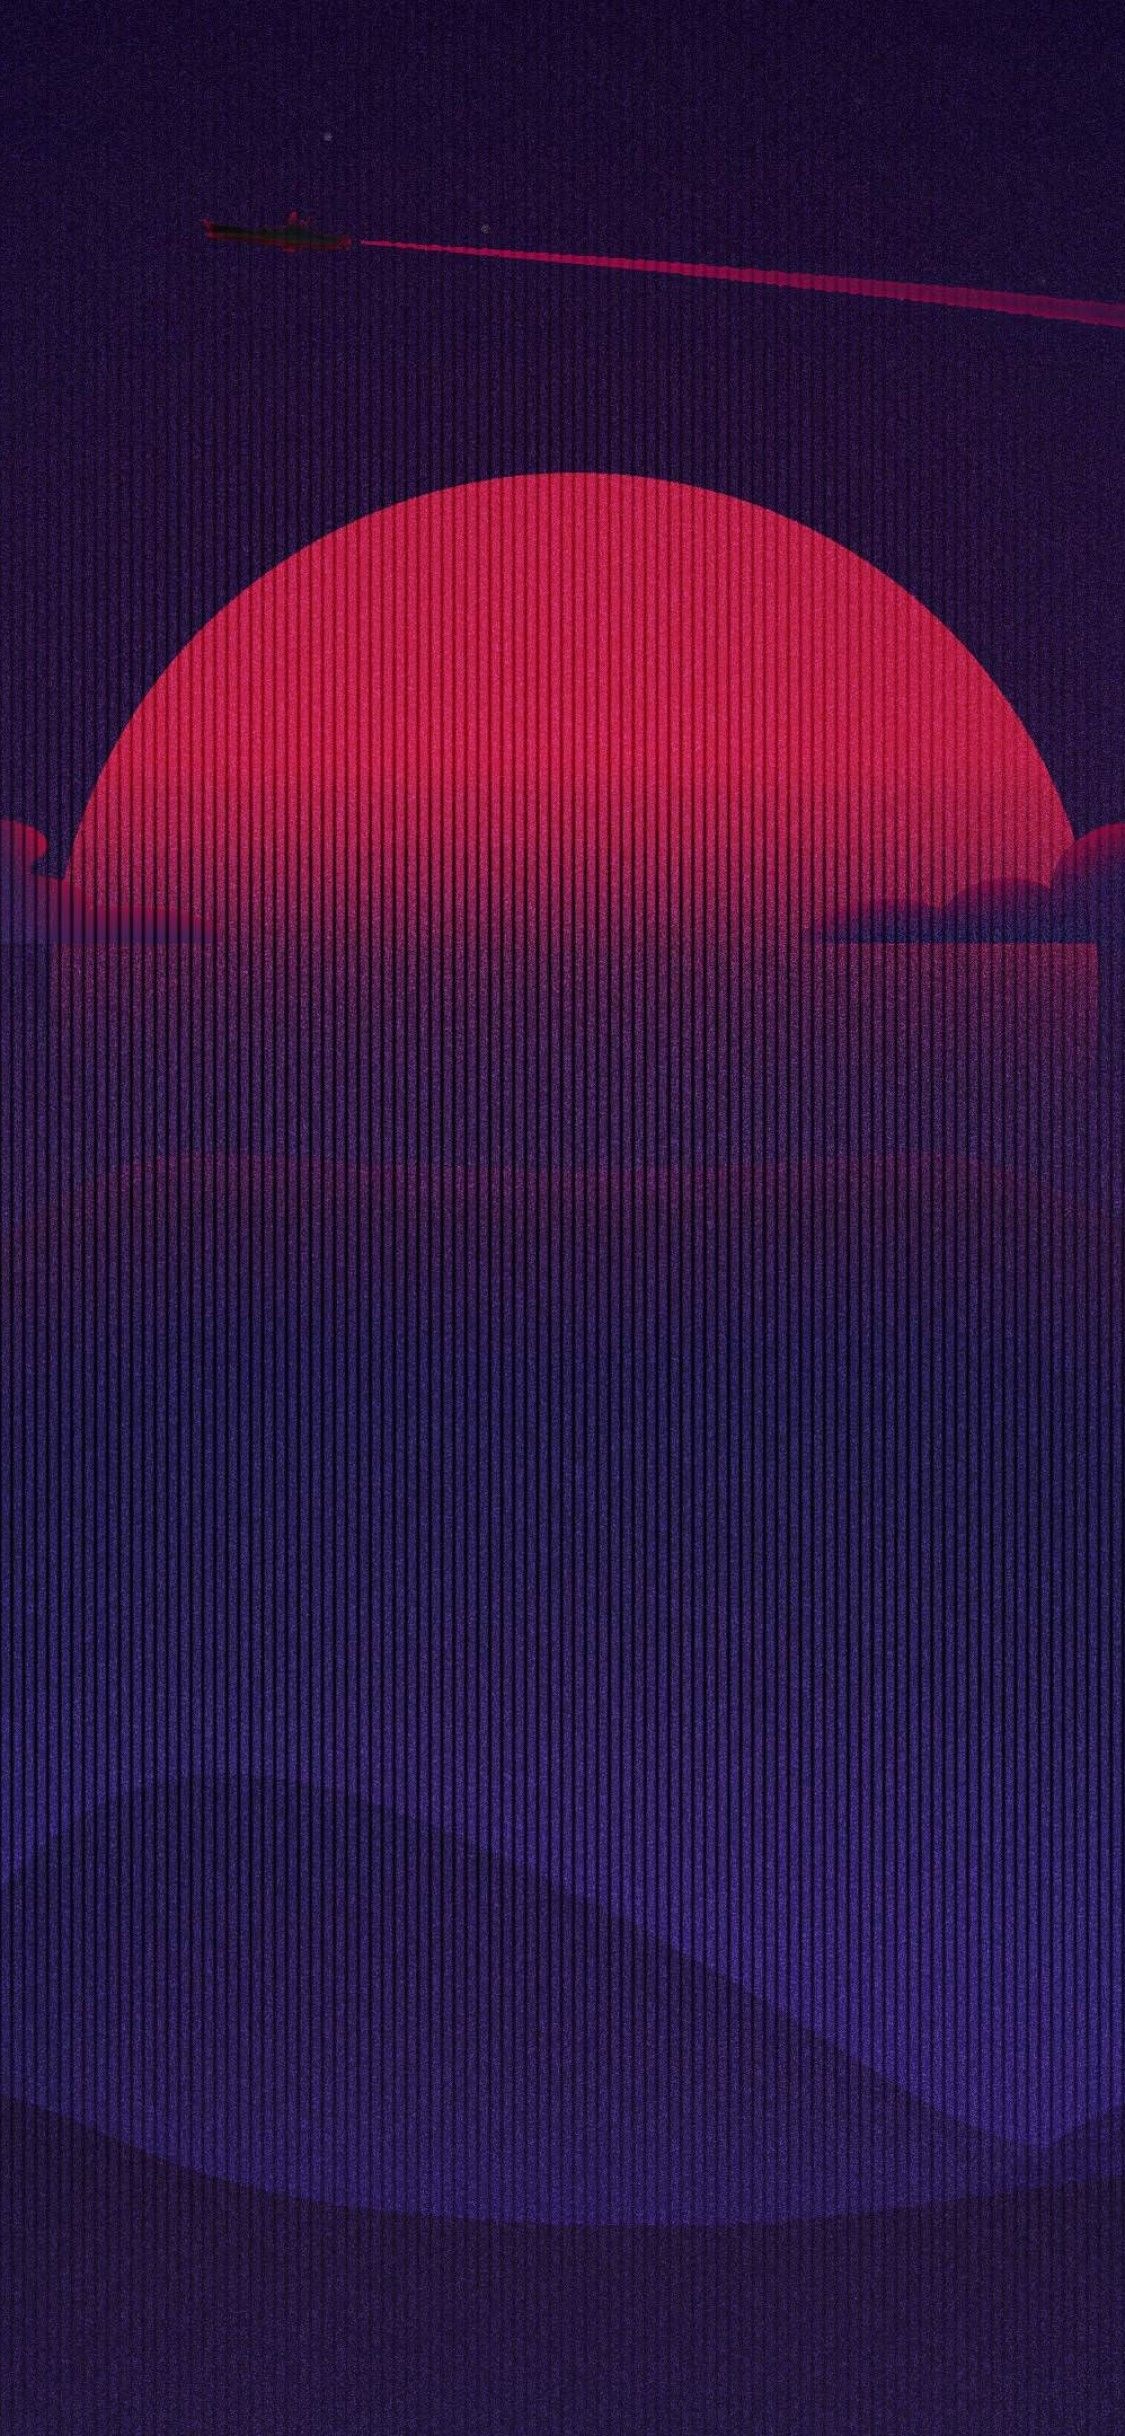 Download 1125x2436 Synthwave, Mountain, Clouds, Retrowave